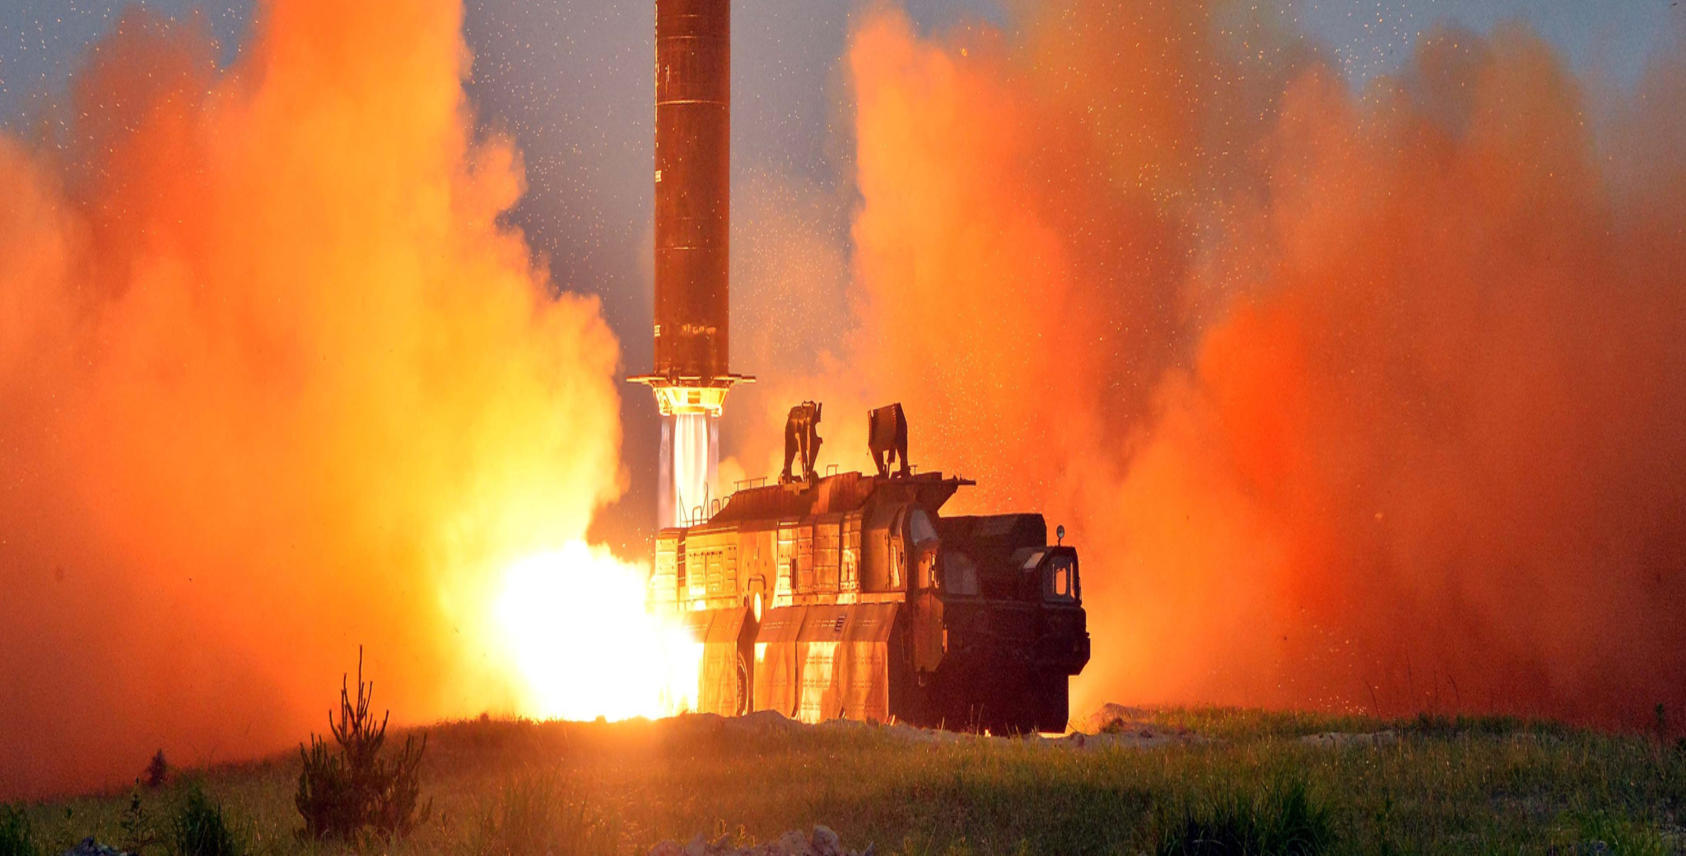 In a photo released by the North Korean government on June 23, 2016, an apparently successful launch of North Korea’s Musudan missile